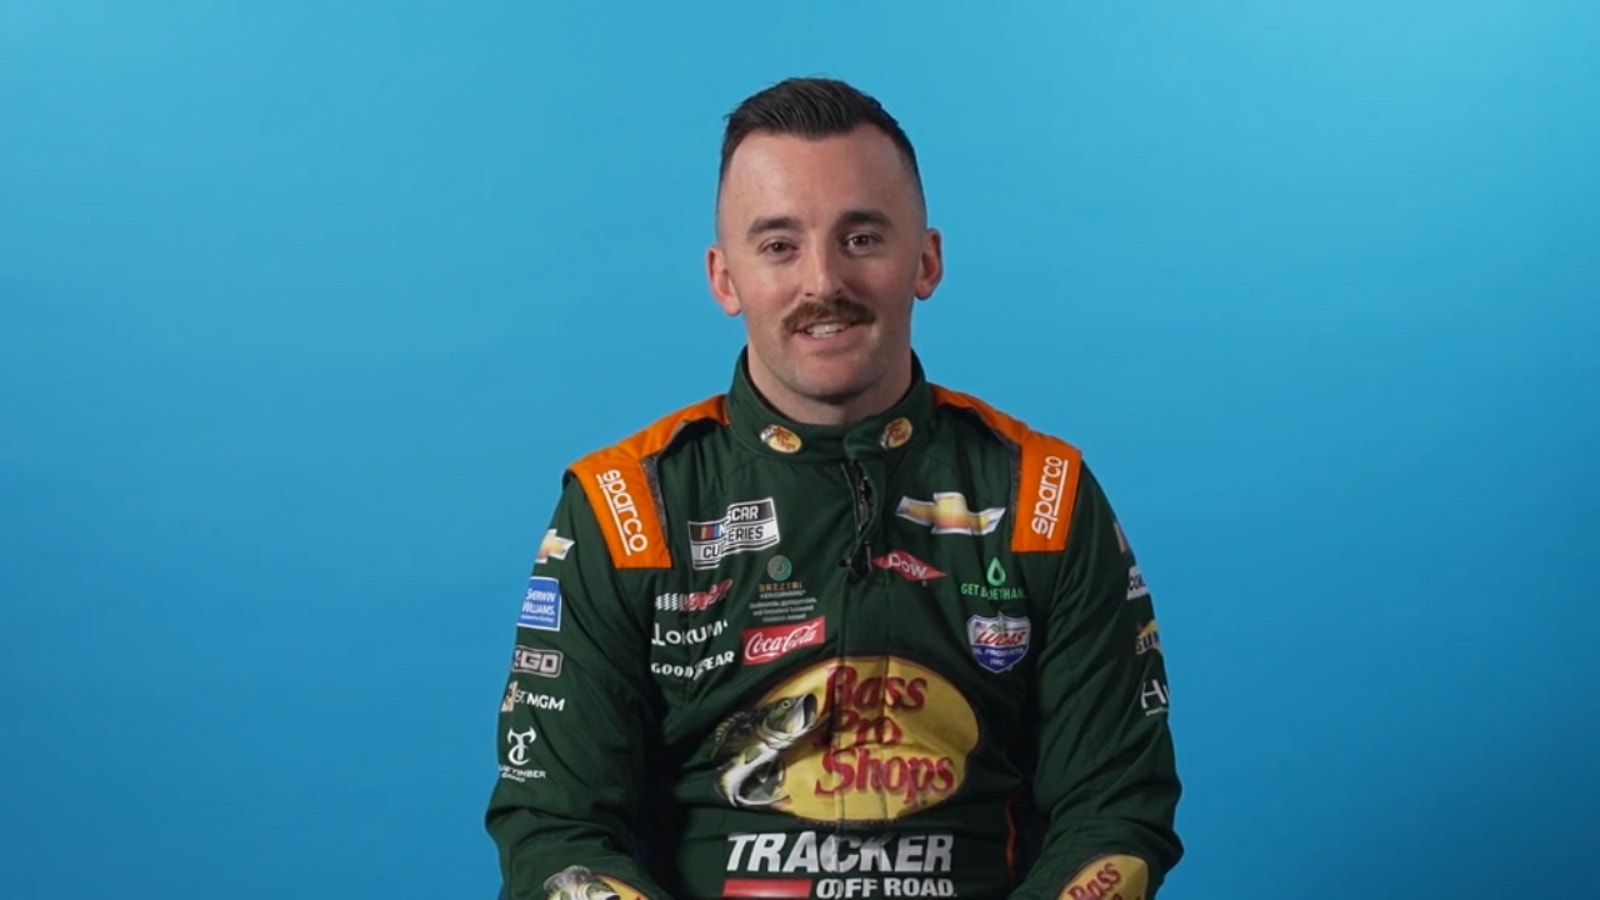 Austin Dillon looks at the photo of himself from '98